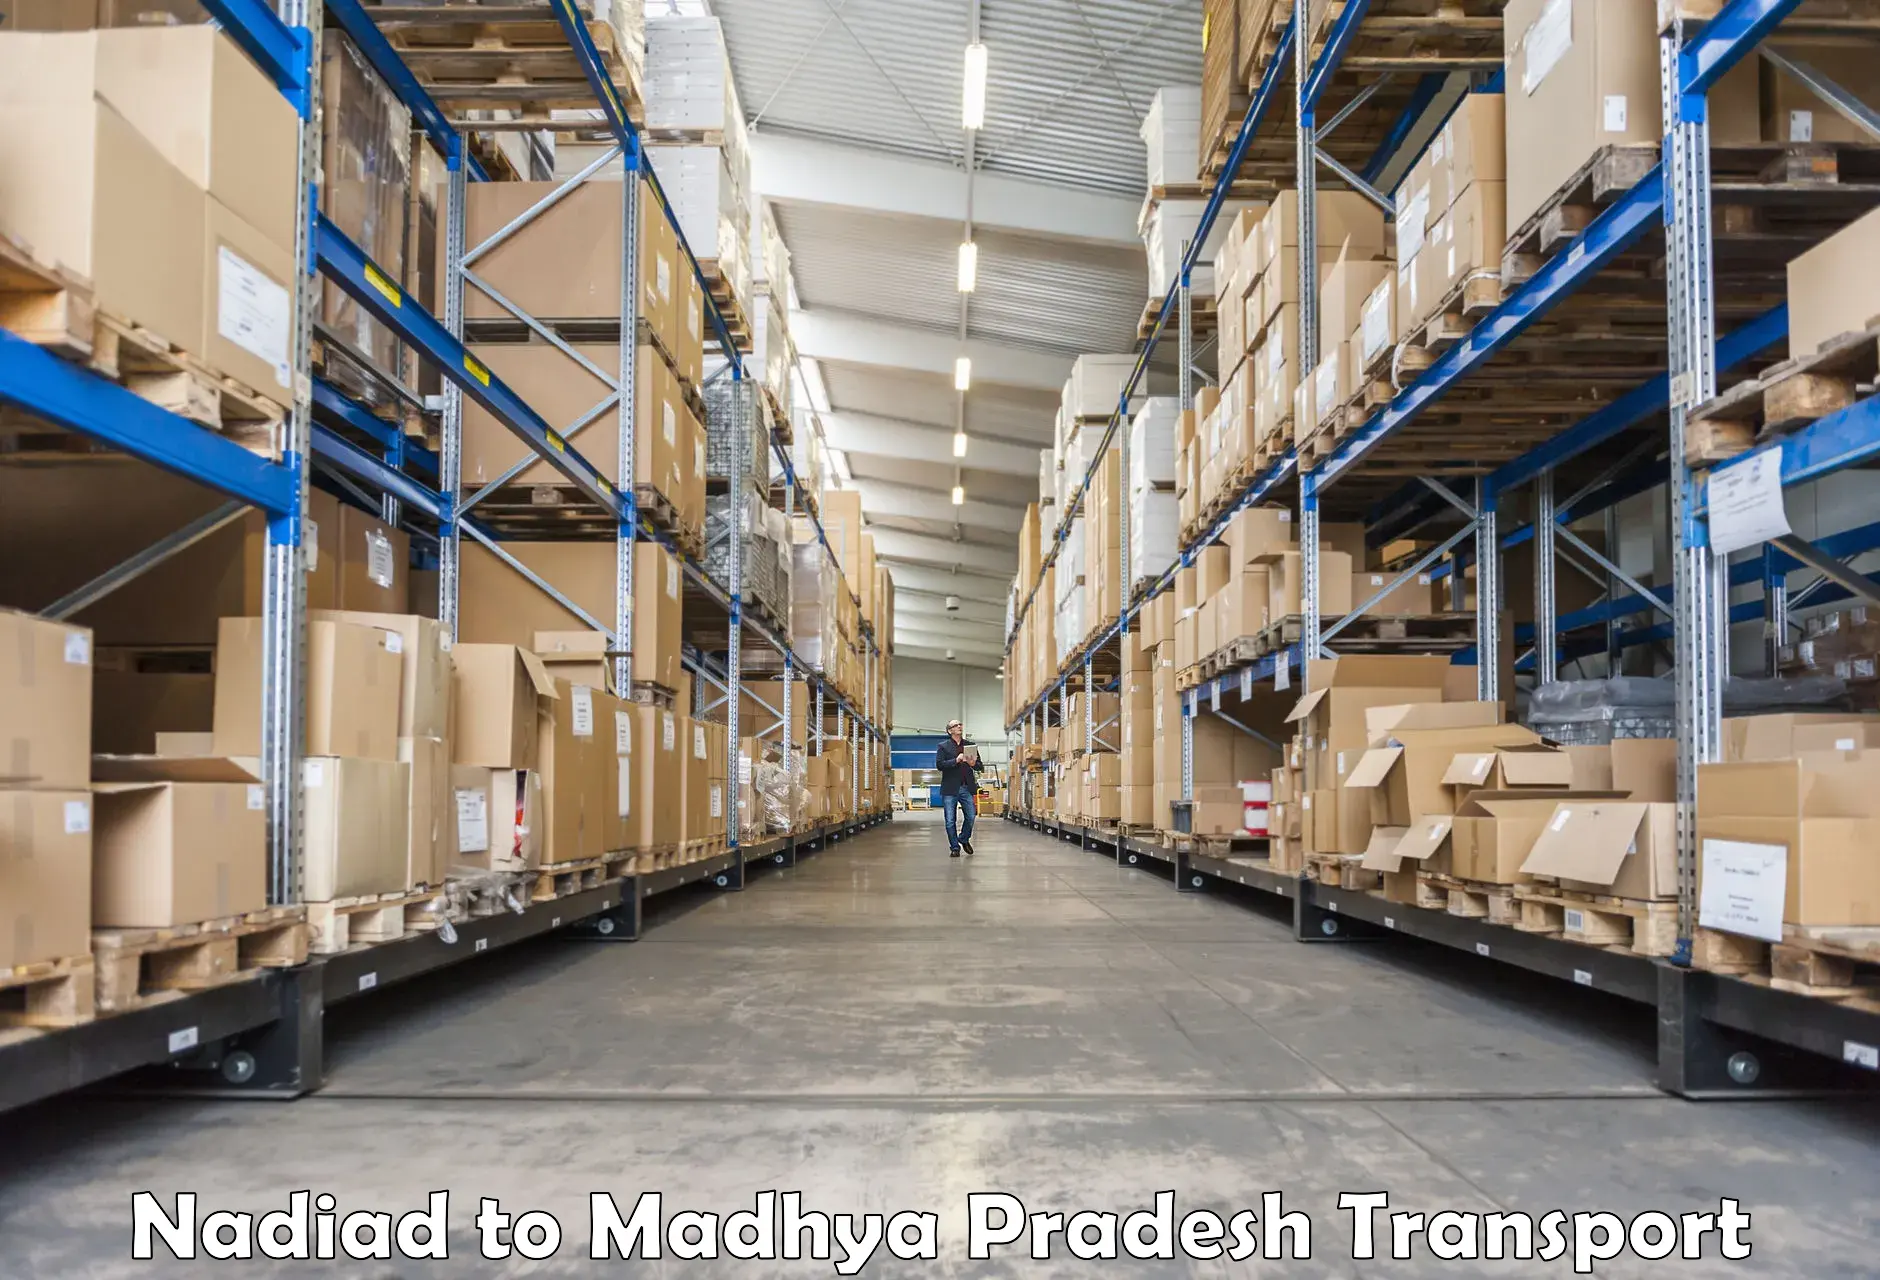 Container transport service Nadiad to Gwalior